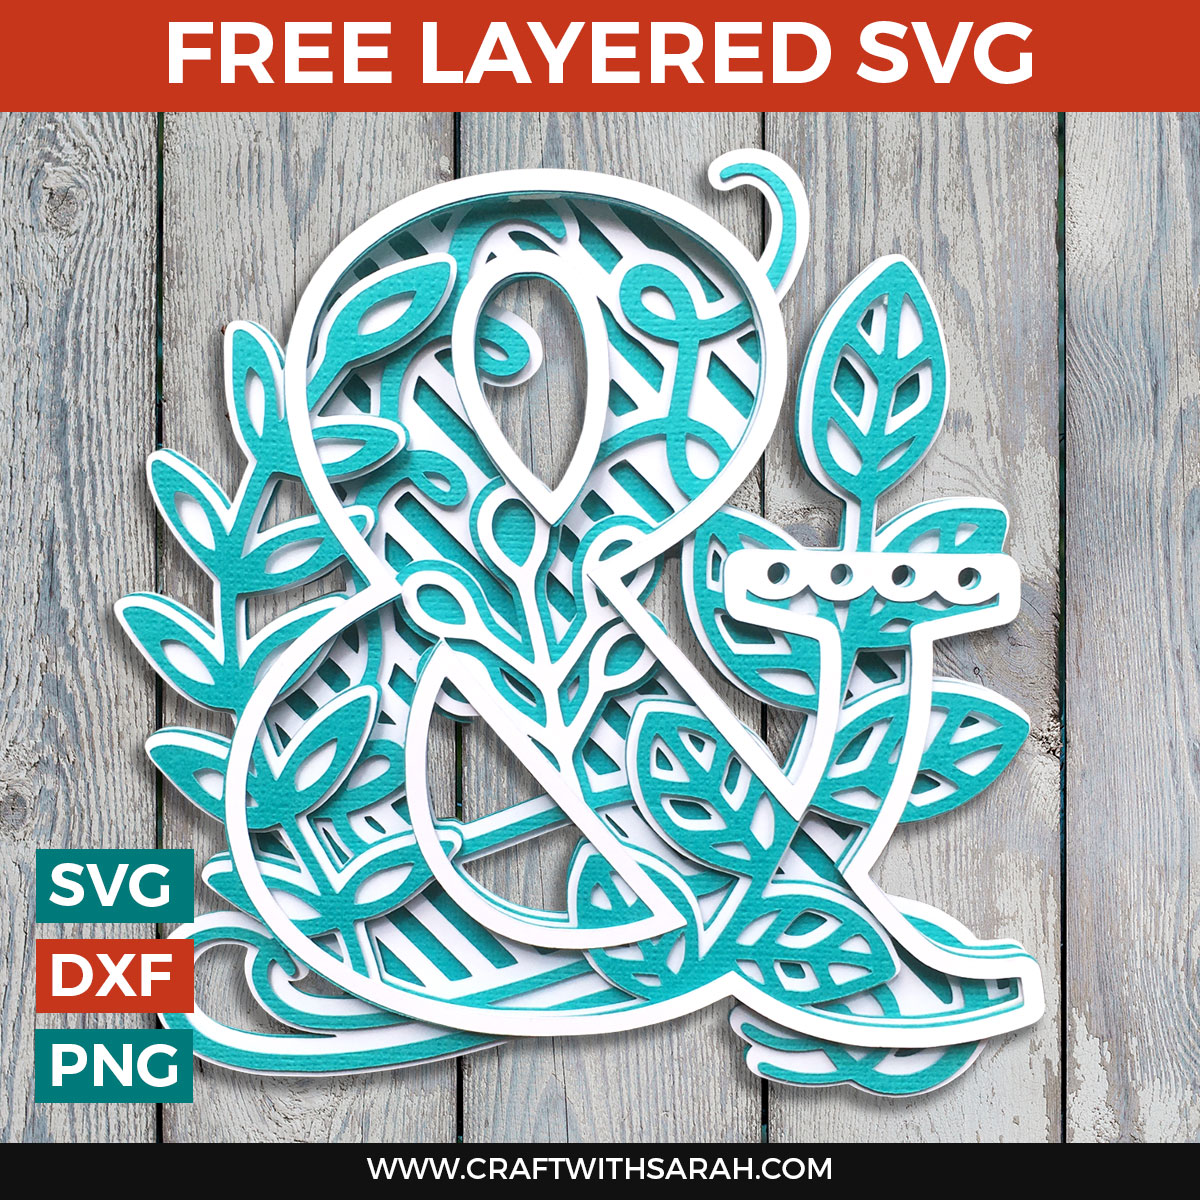 Free SVGs for Cricut with Sarah